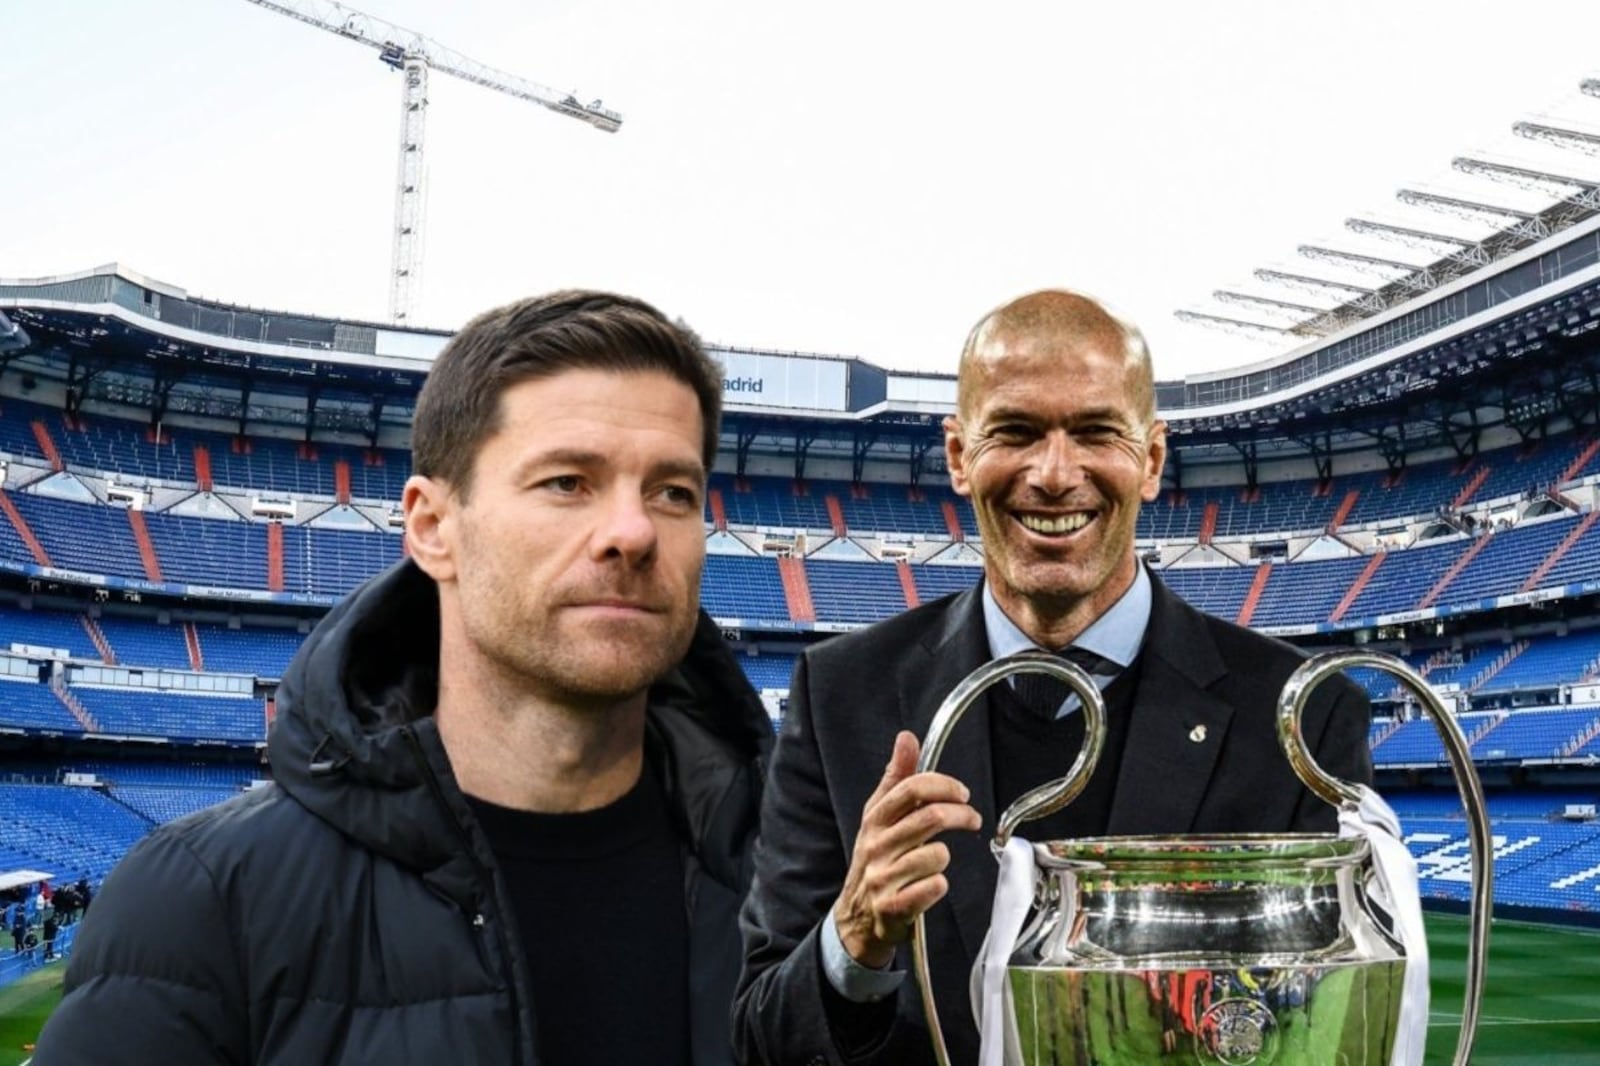 Neither Xabi Alonso nor Zidane, Real Madrid have the most awaited return as coach